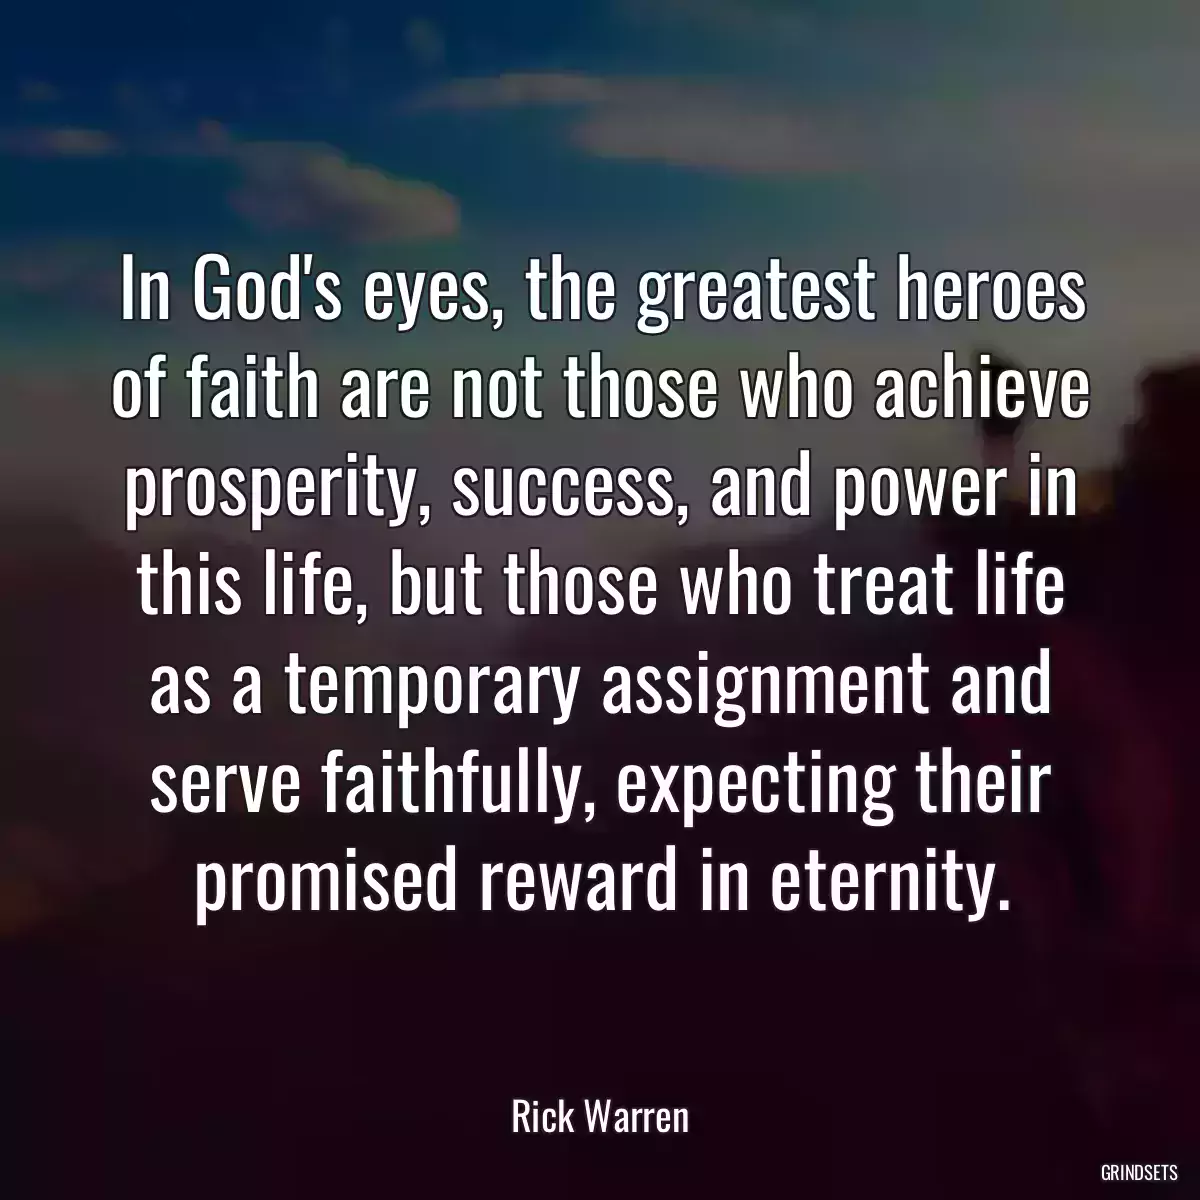 In God\'s eyes, the greatest heroes of faith are not those who achieve prosperity, success, and power in this life, but those who treat life as a temporary assignment and serve faithfully, expecting their promised reward in eternity.